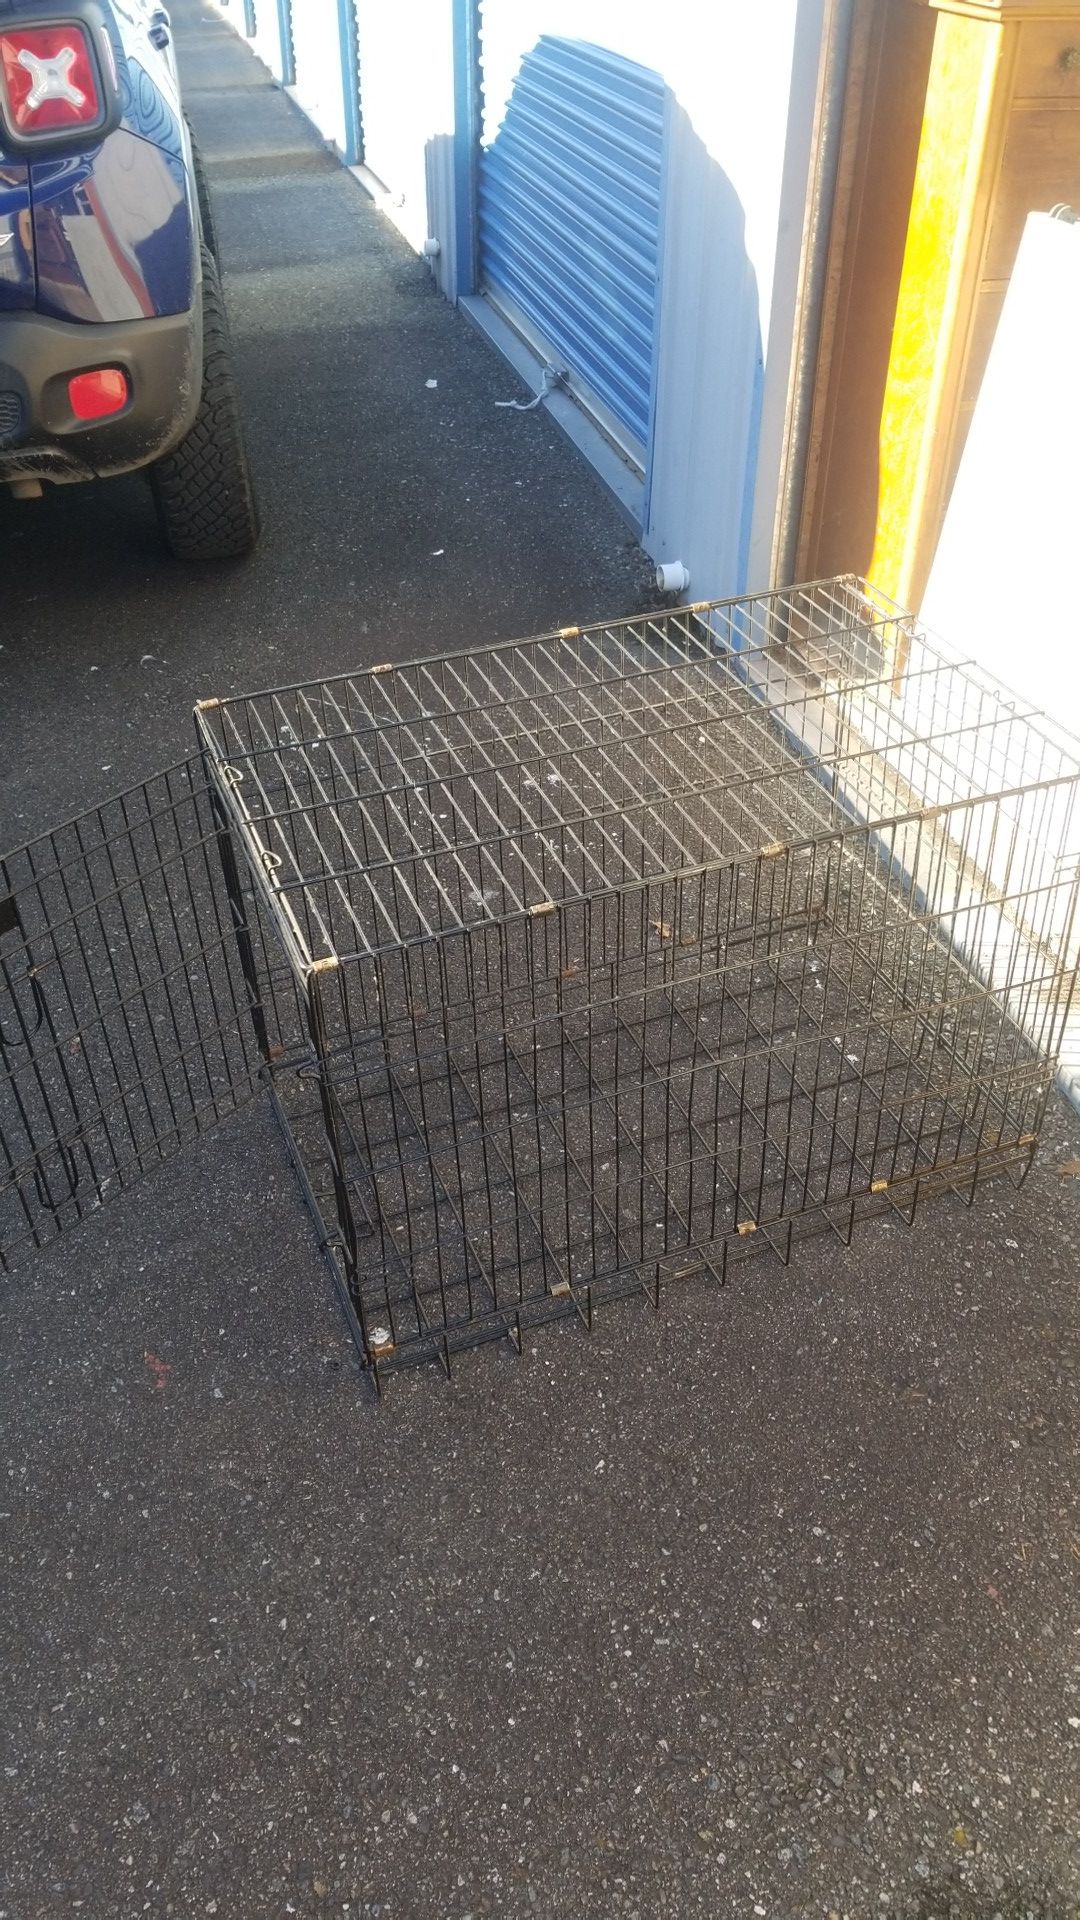 Folding dog crate 2ft tall by 2.5ft by 1.5 ft